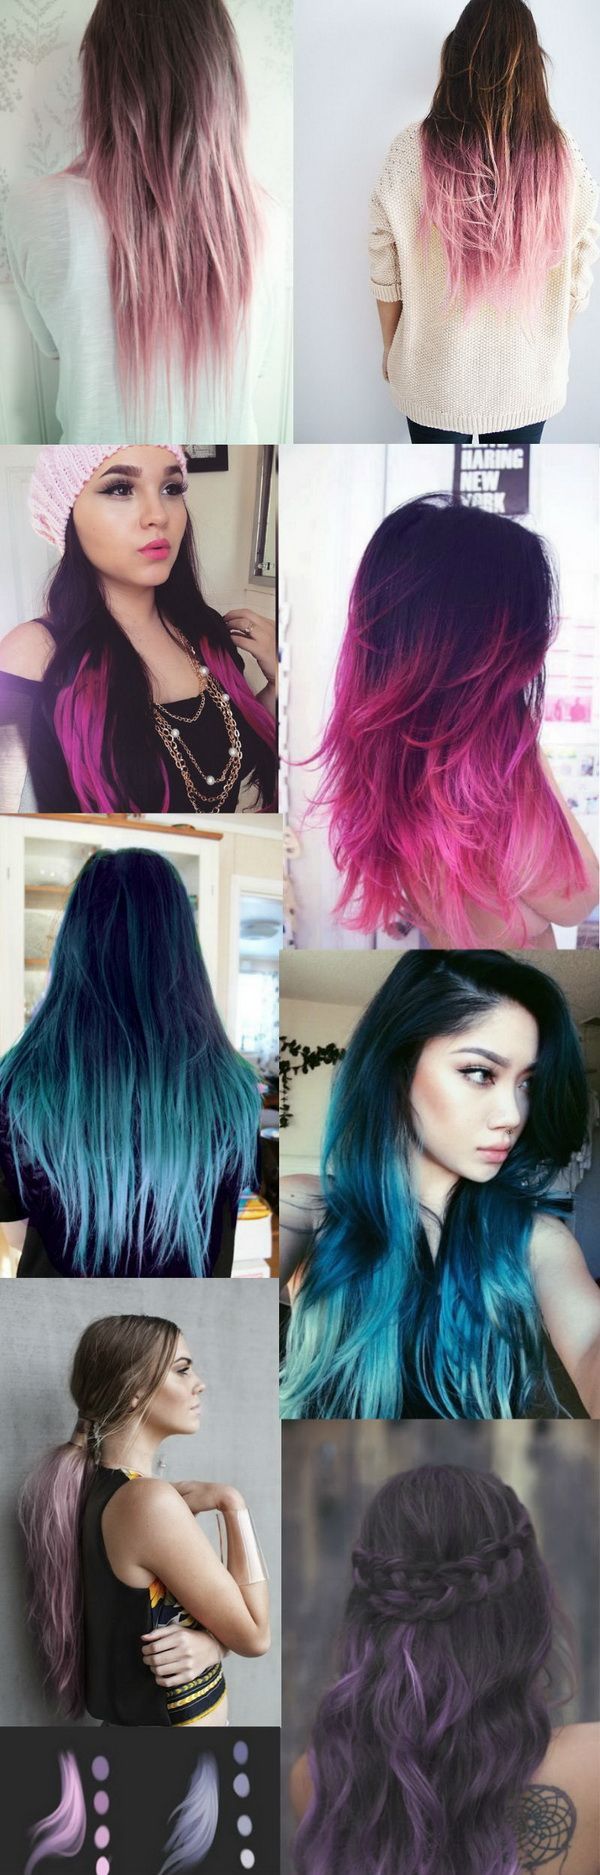 Dark Black / Brown to Pastel Ombre Hair Color Trends 2015